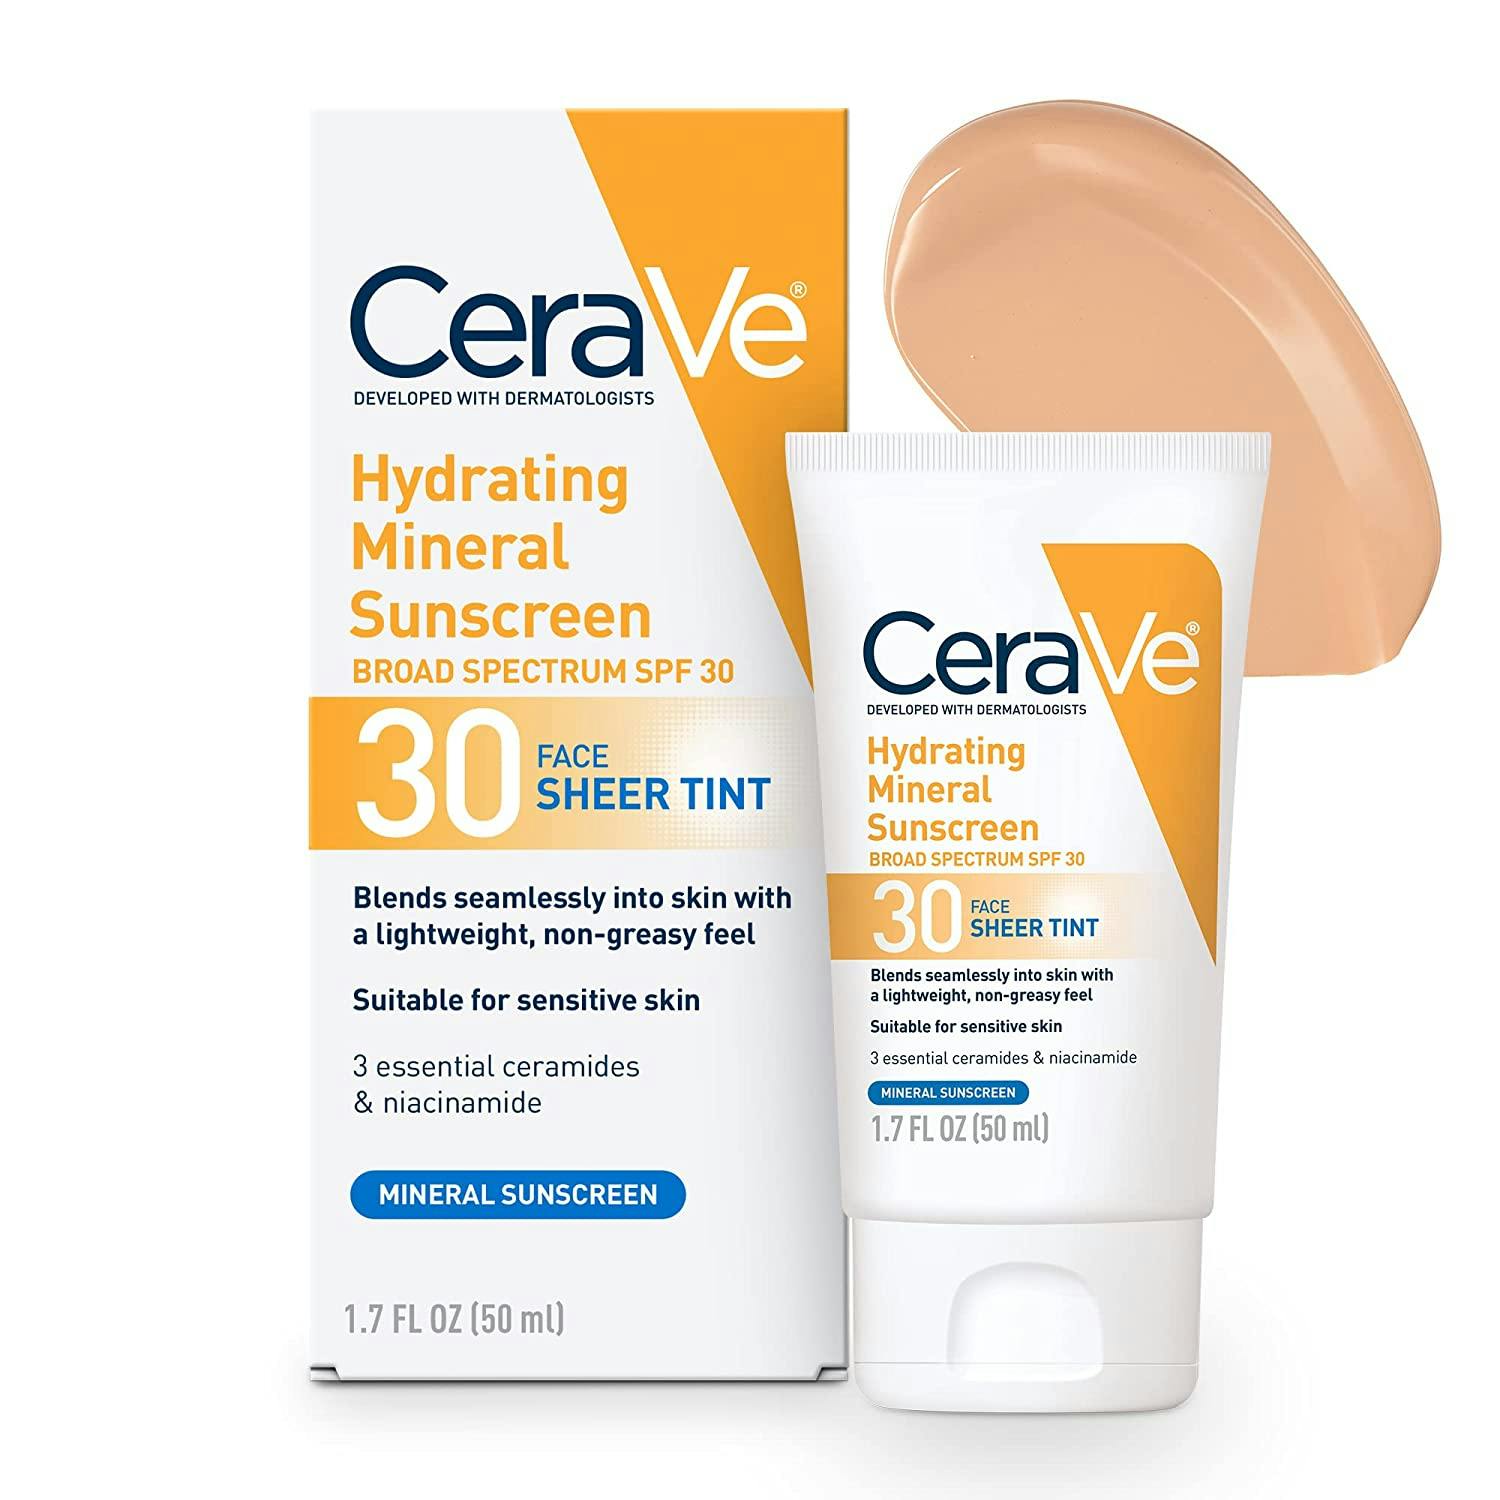 cerave-tinted-sunscreen-amazon